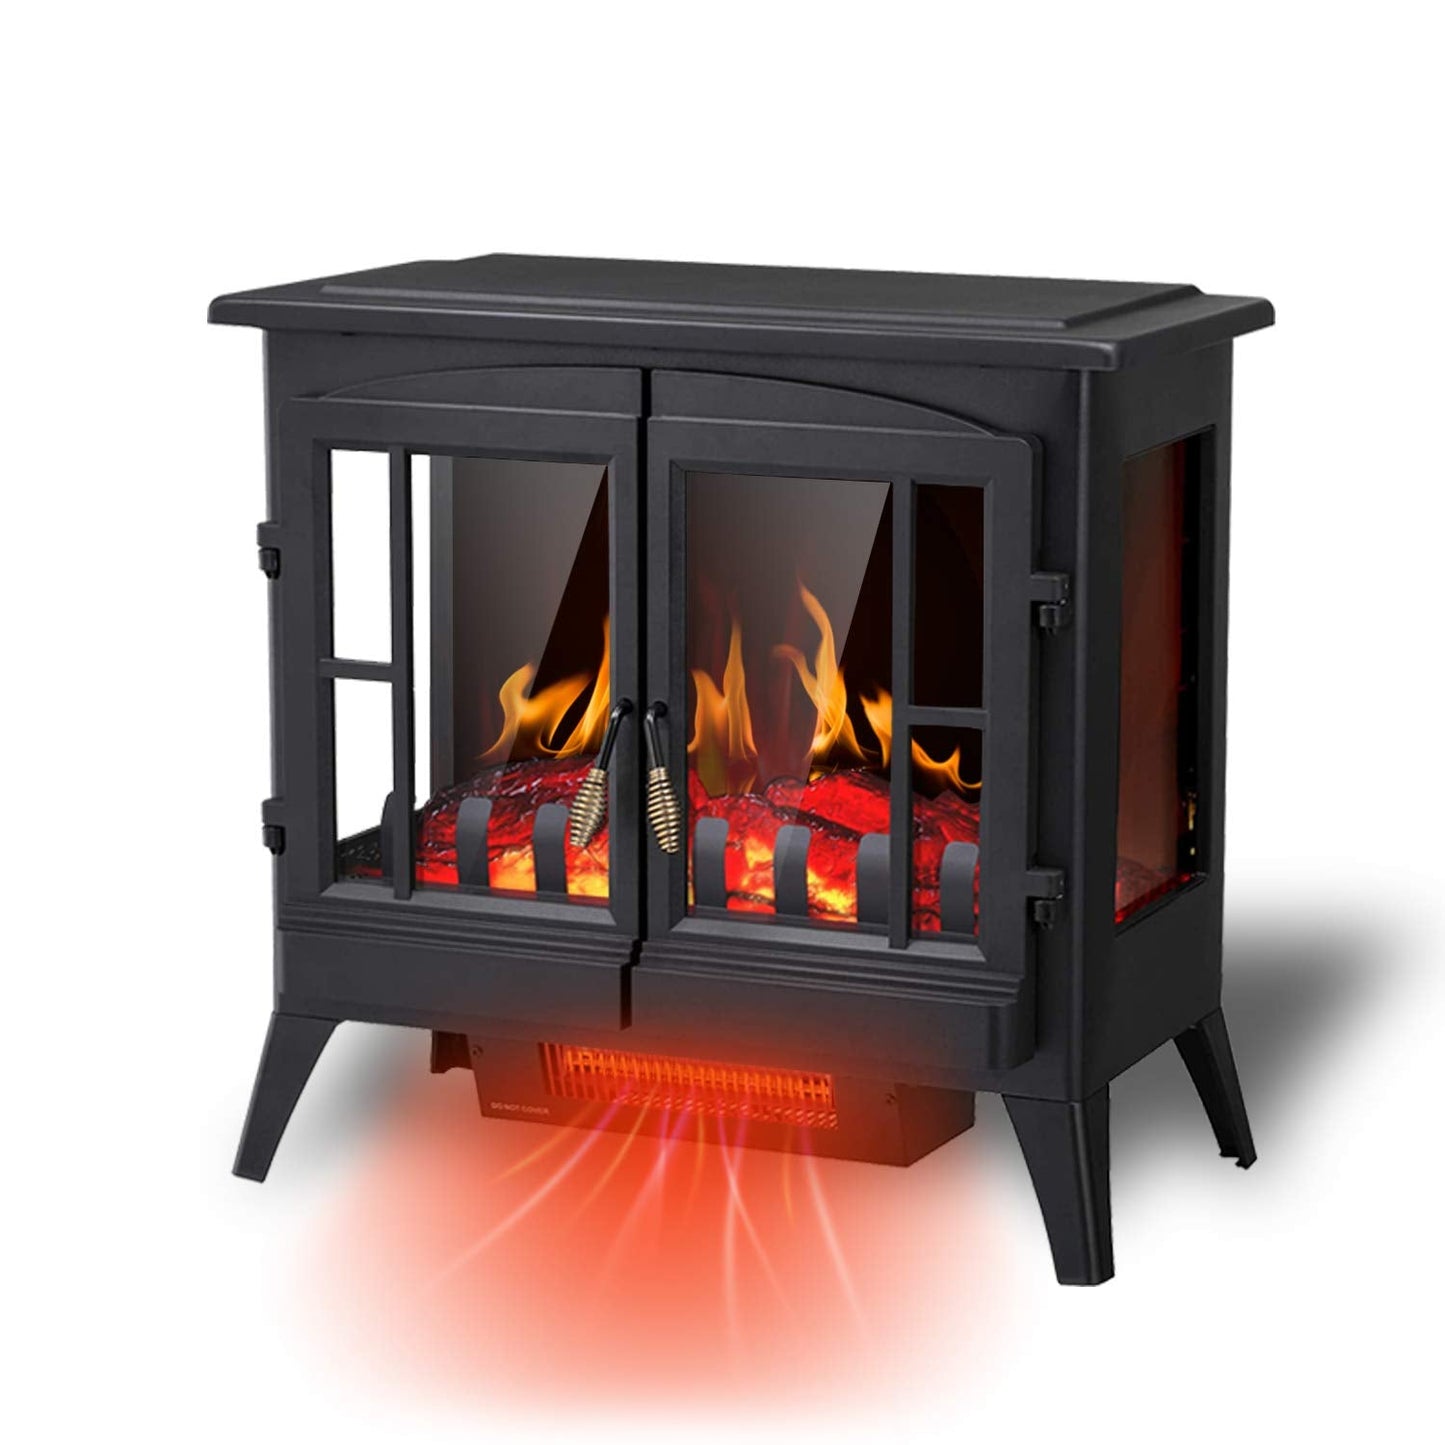 R.W.FLAME 24" 3D Free Standing Outdoor Fireplace